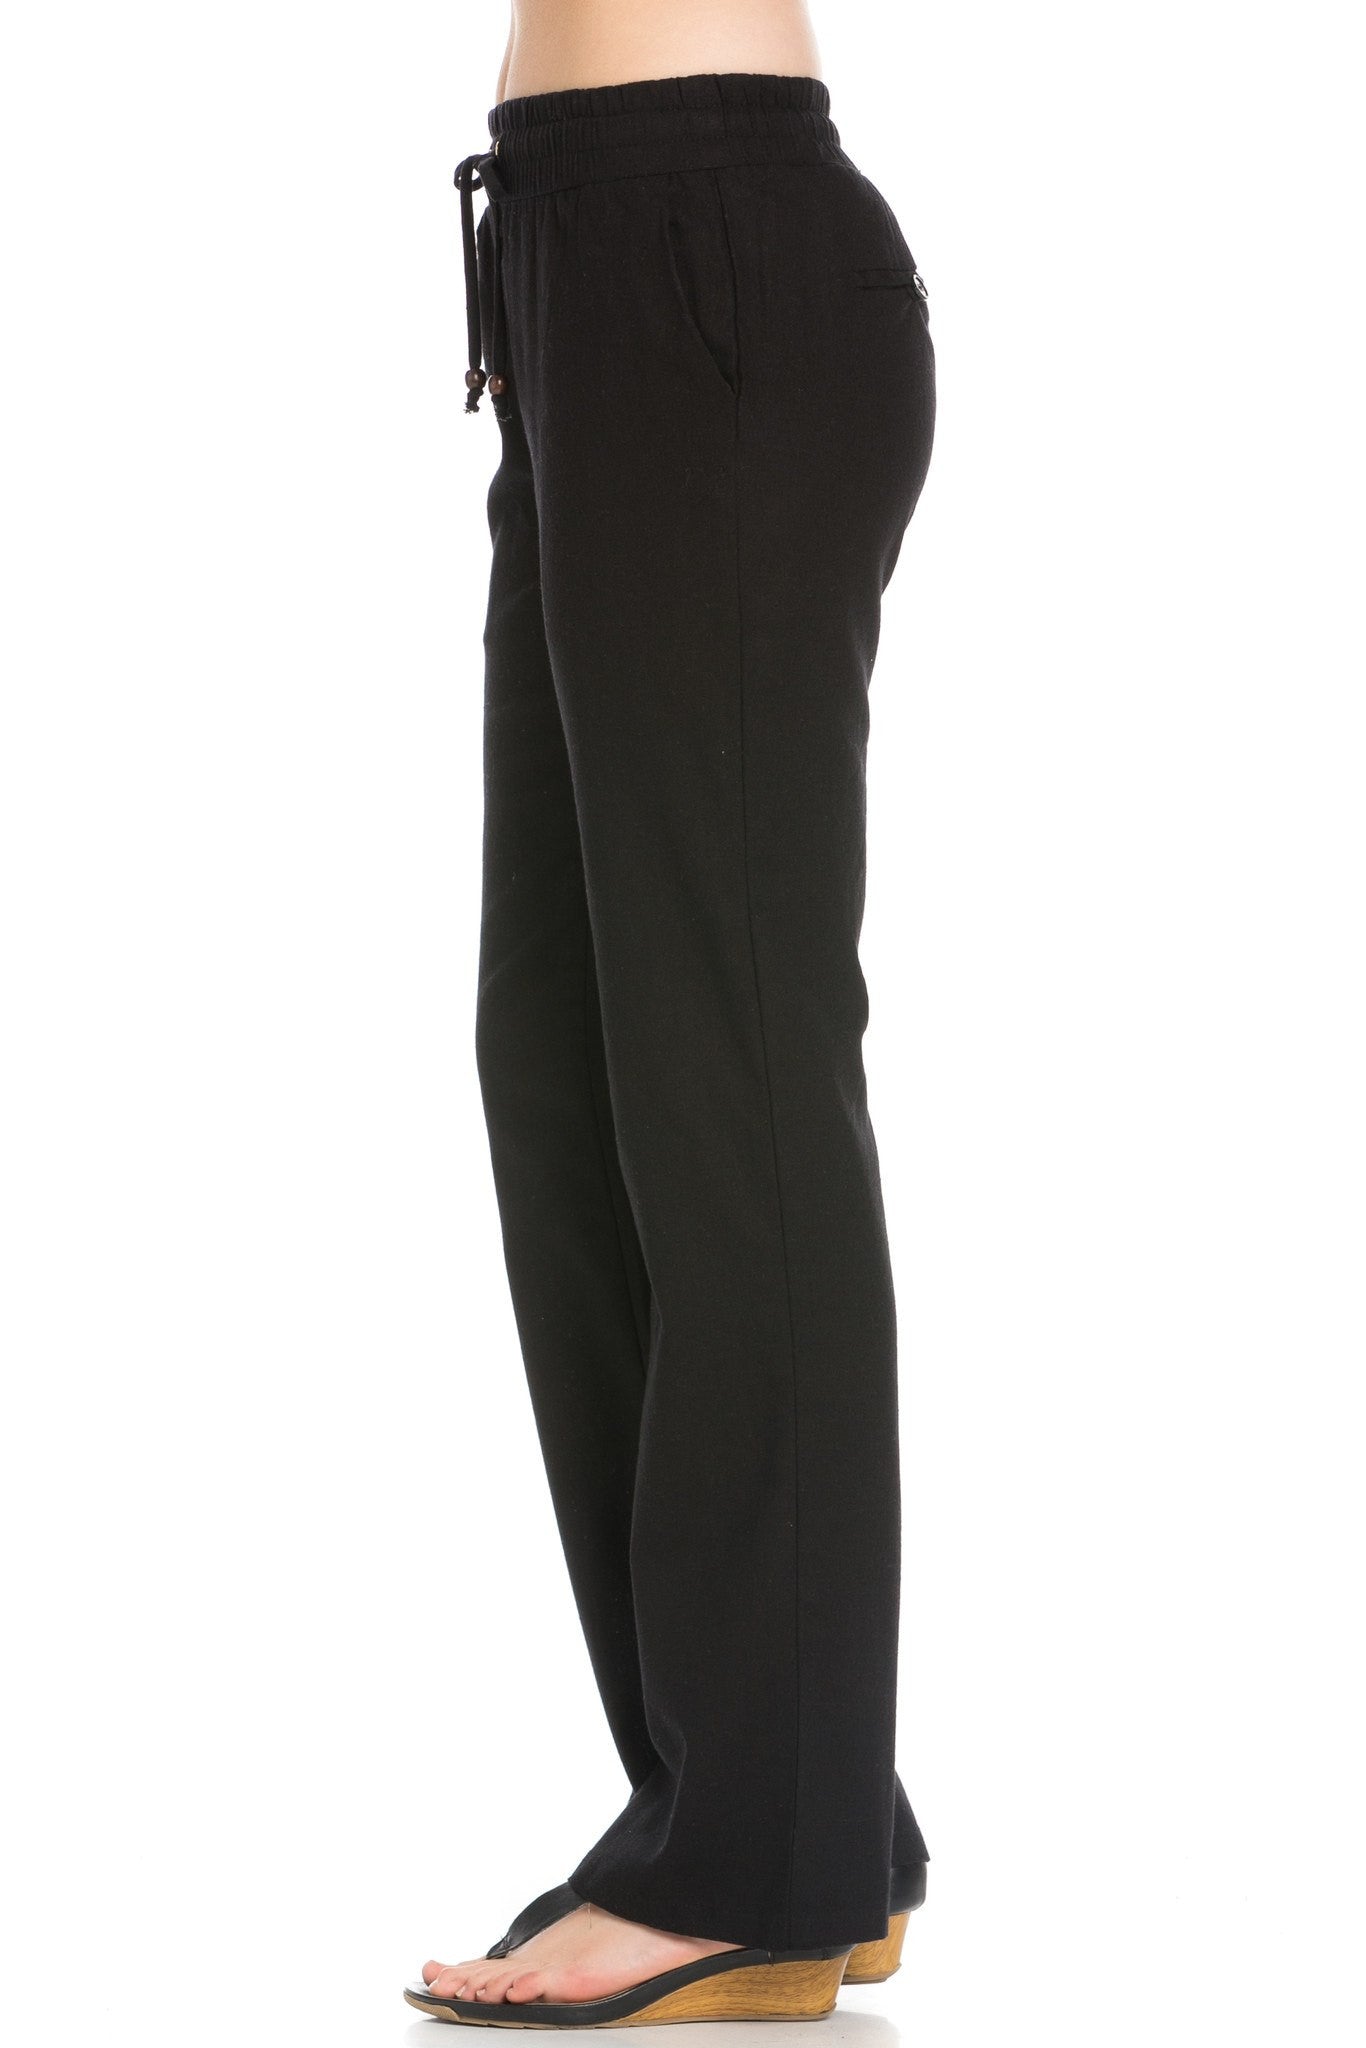 Comfy Drawstring Linen Pants Long with Band Waist (Black) - Poplooks